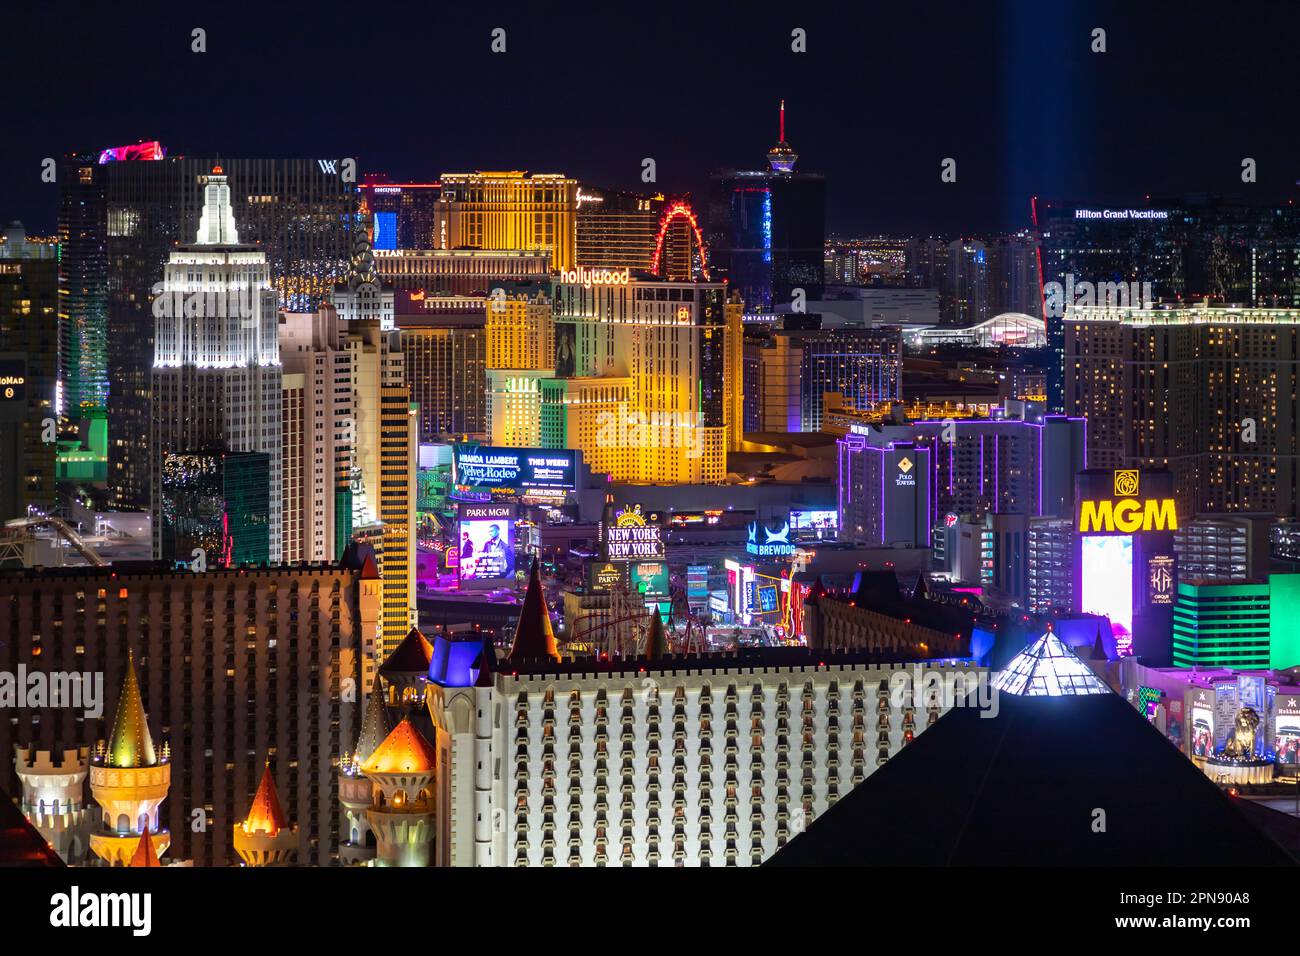 A picture of the Las Vegas Strip at night. Stock Photo